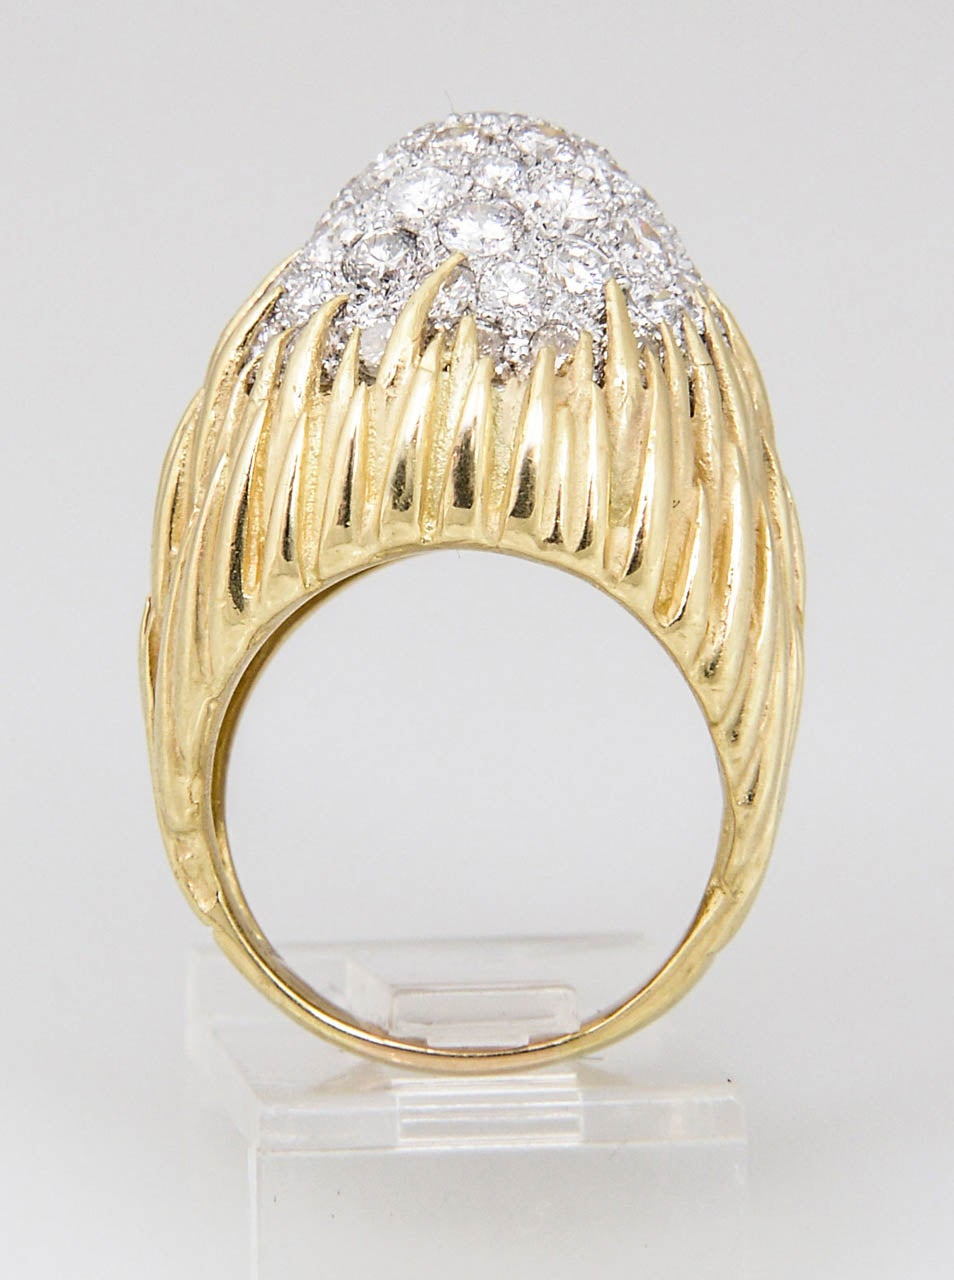 Naturalist design with vine like 18k yellow gold prongs holding 3 carats (ATW.) of pave set diamonds mounted in 18k white gold dome.

 US size between 5 3/4  - 6.